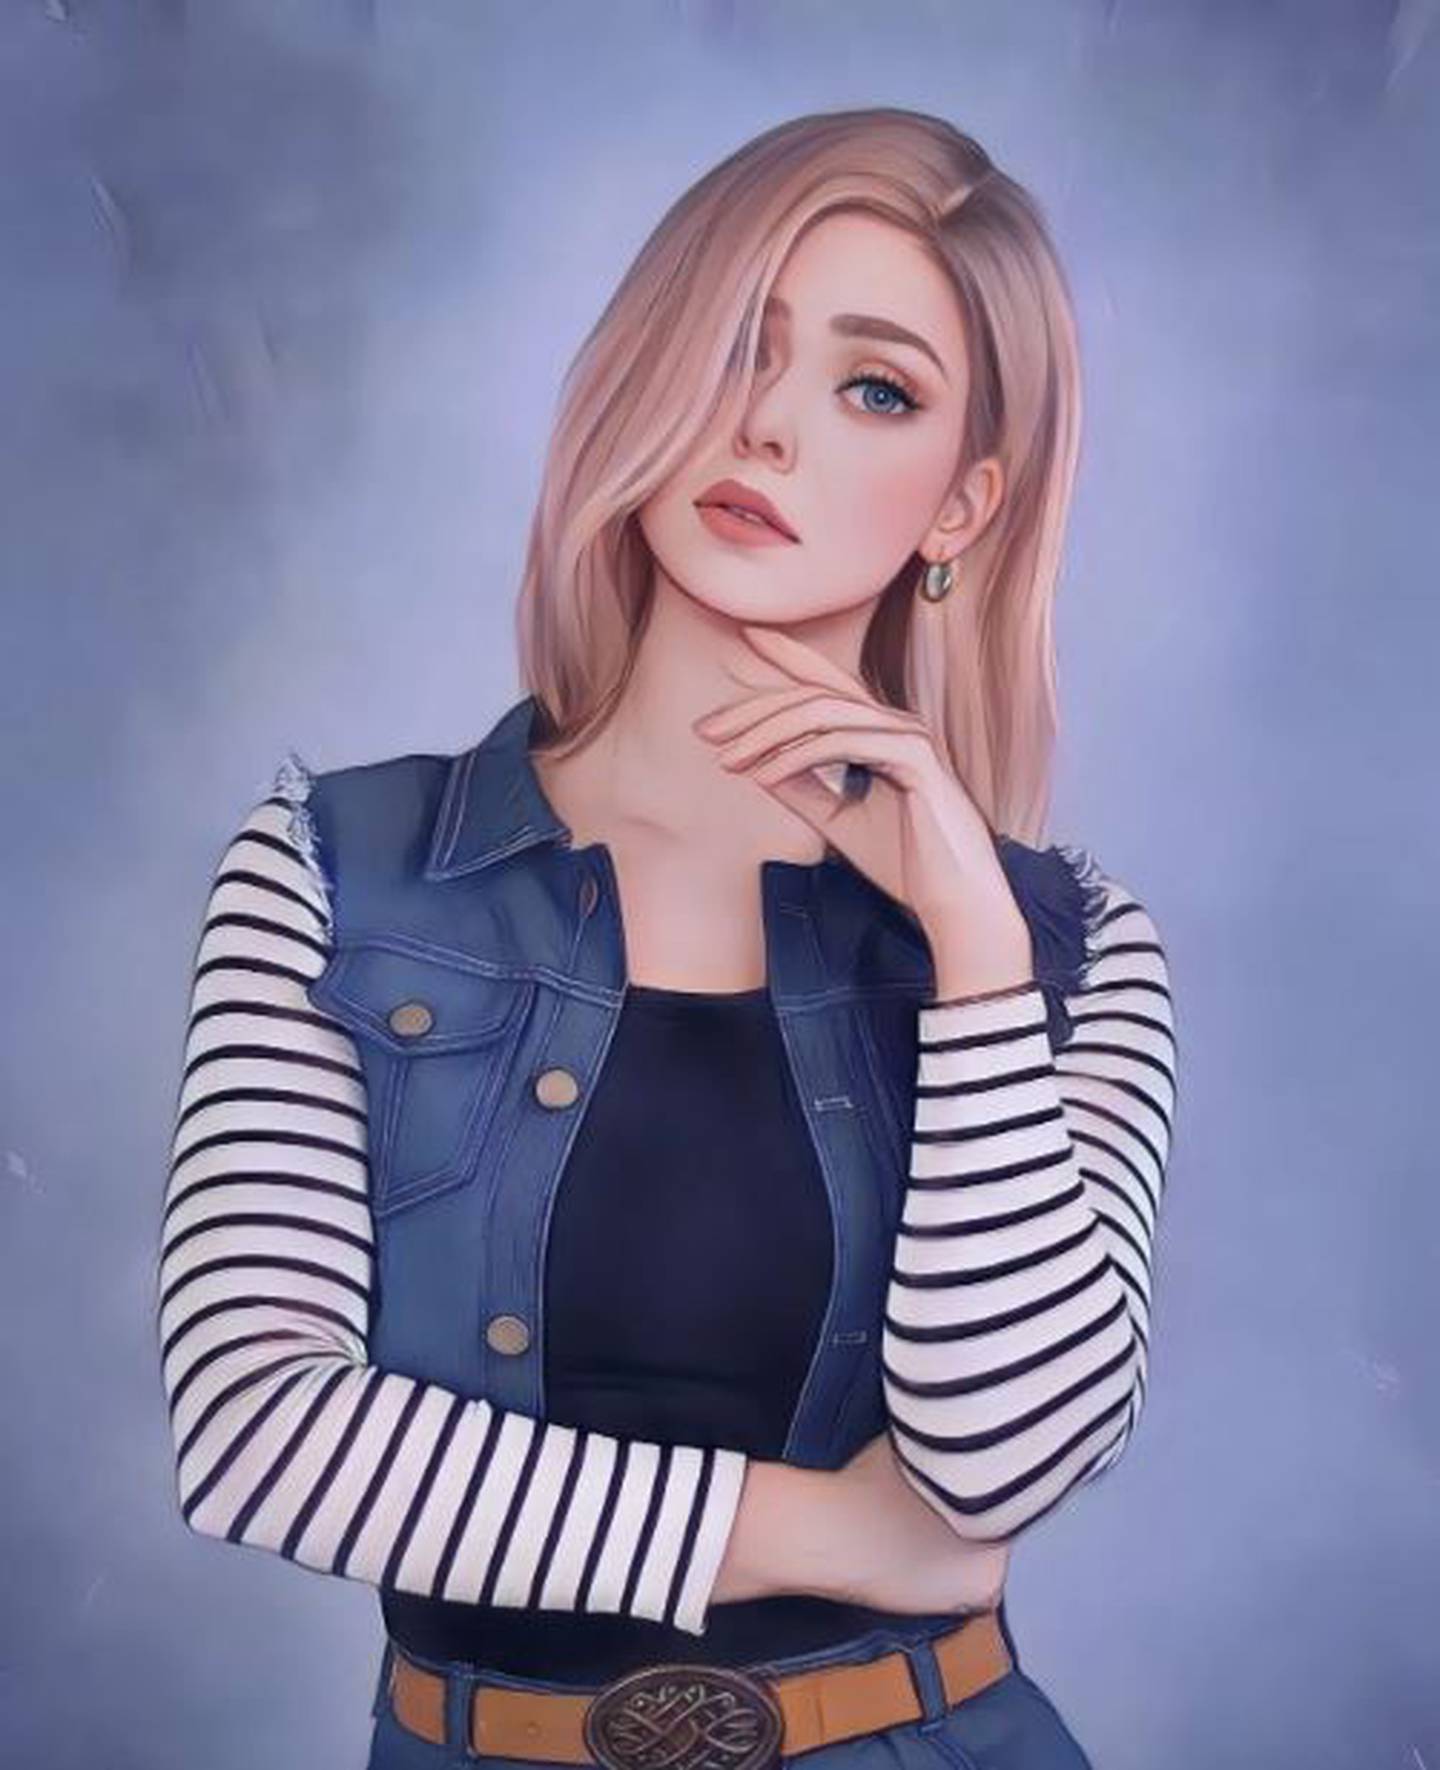 Elizabeth Olsen as Android 18 from Dragon Ball